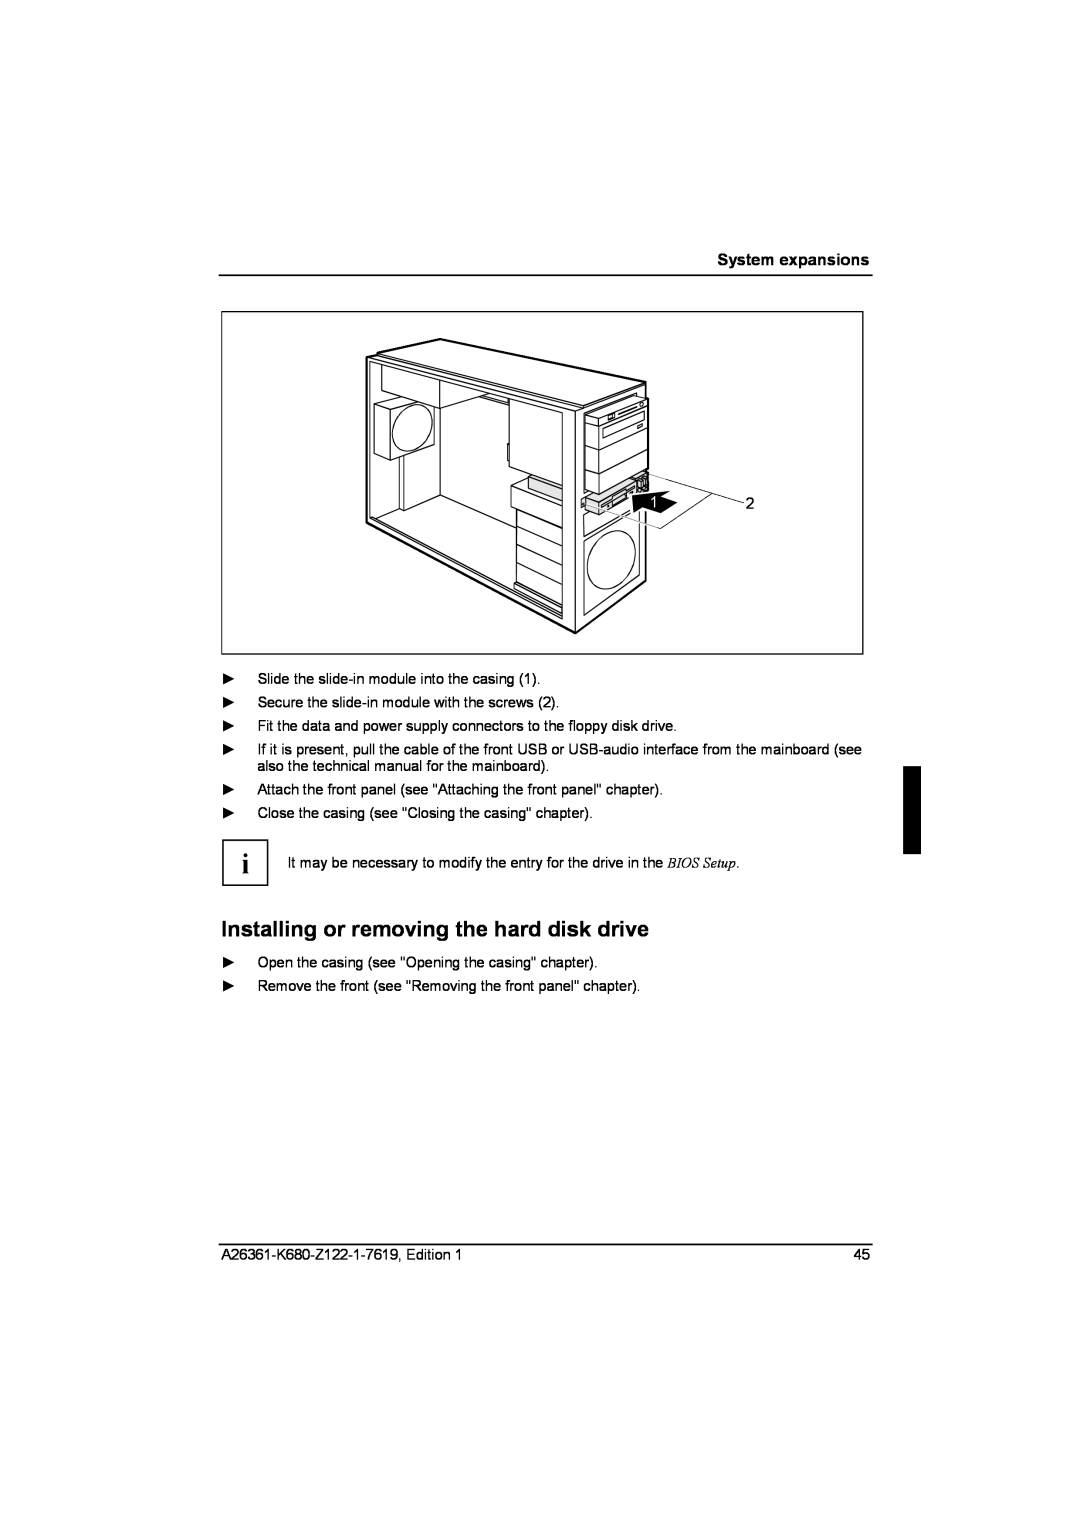 Fujitsu R630, V810 manual Installing or removing the hard disk drive, System expansions 